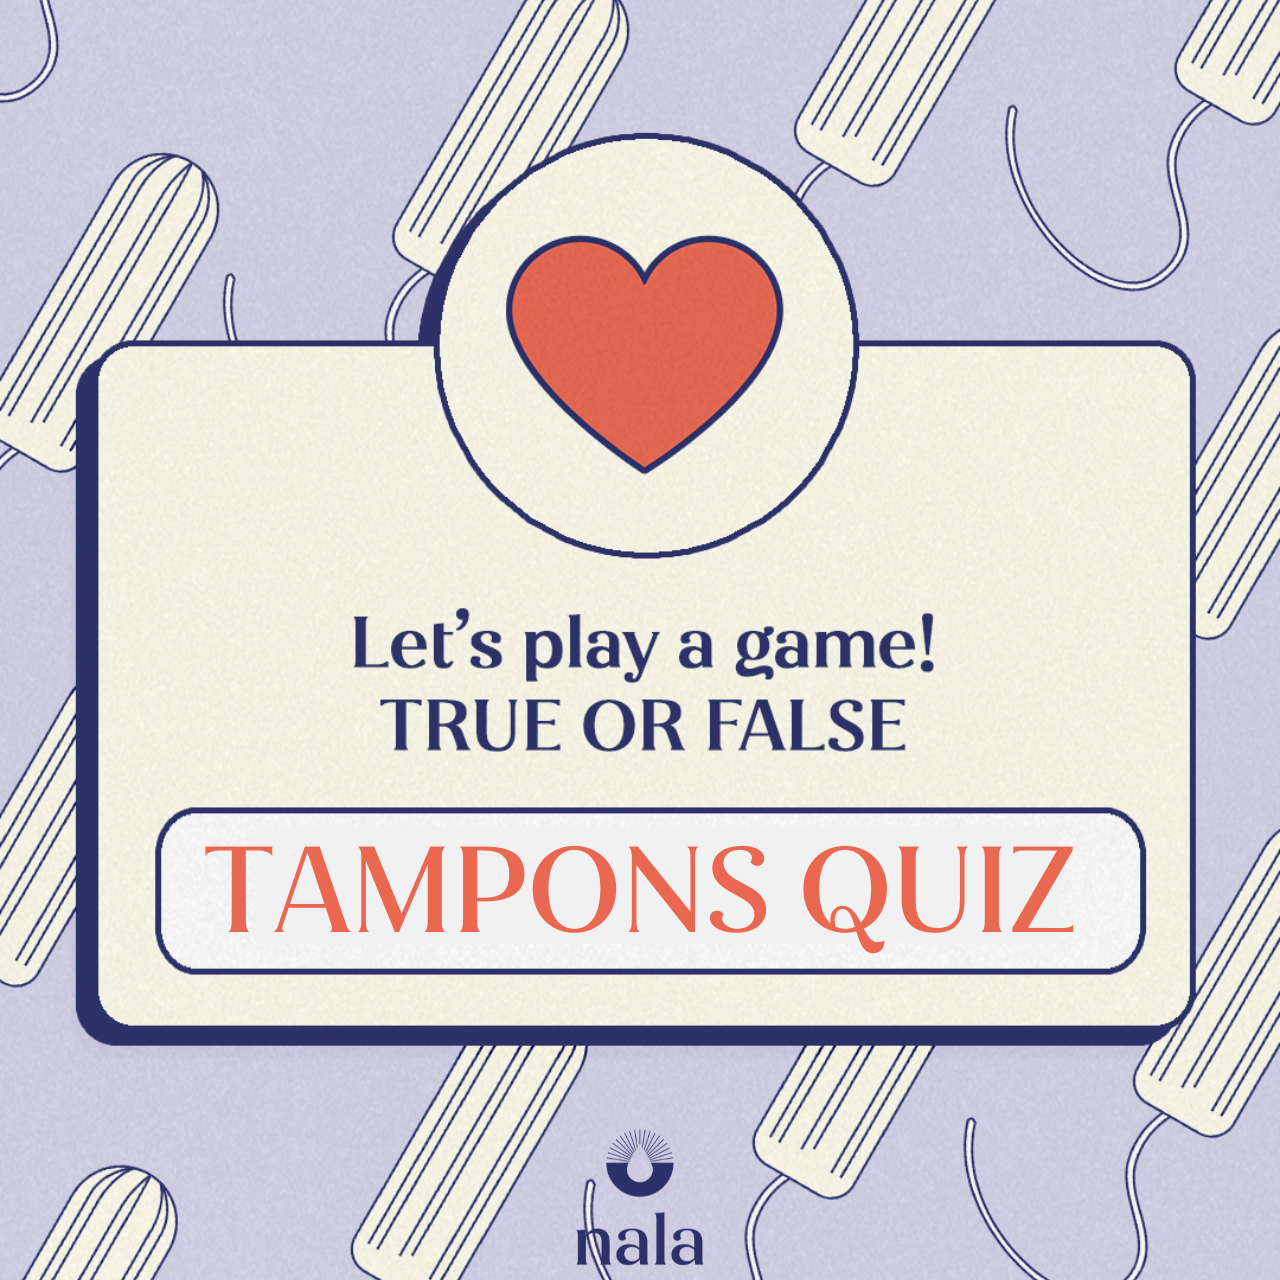 Tampons Quiz: Let's play a game! 🏆